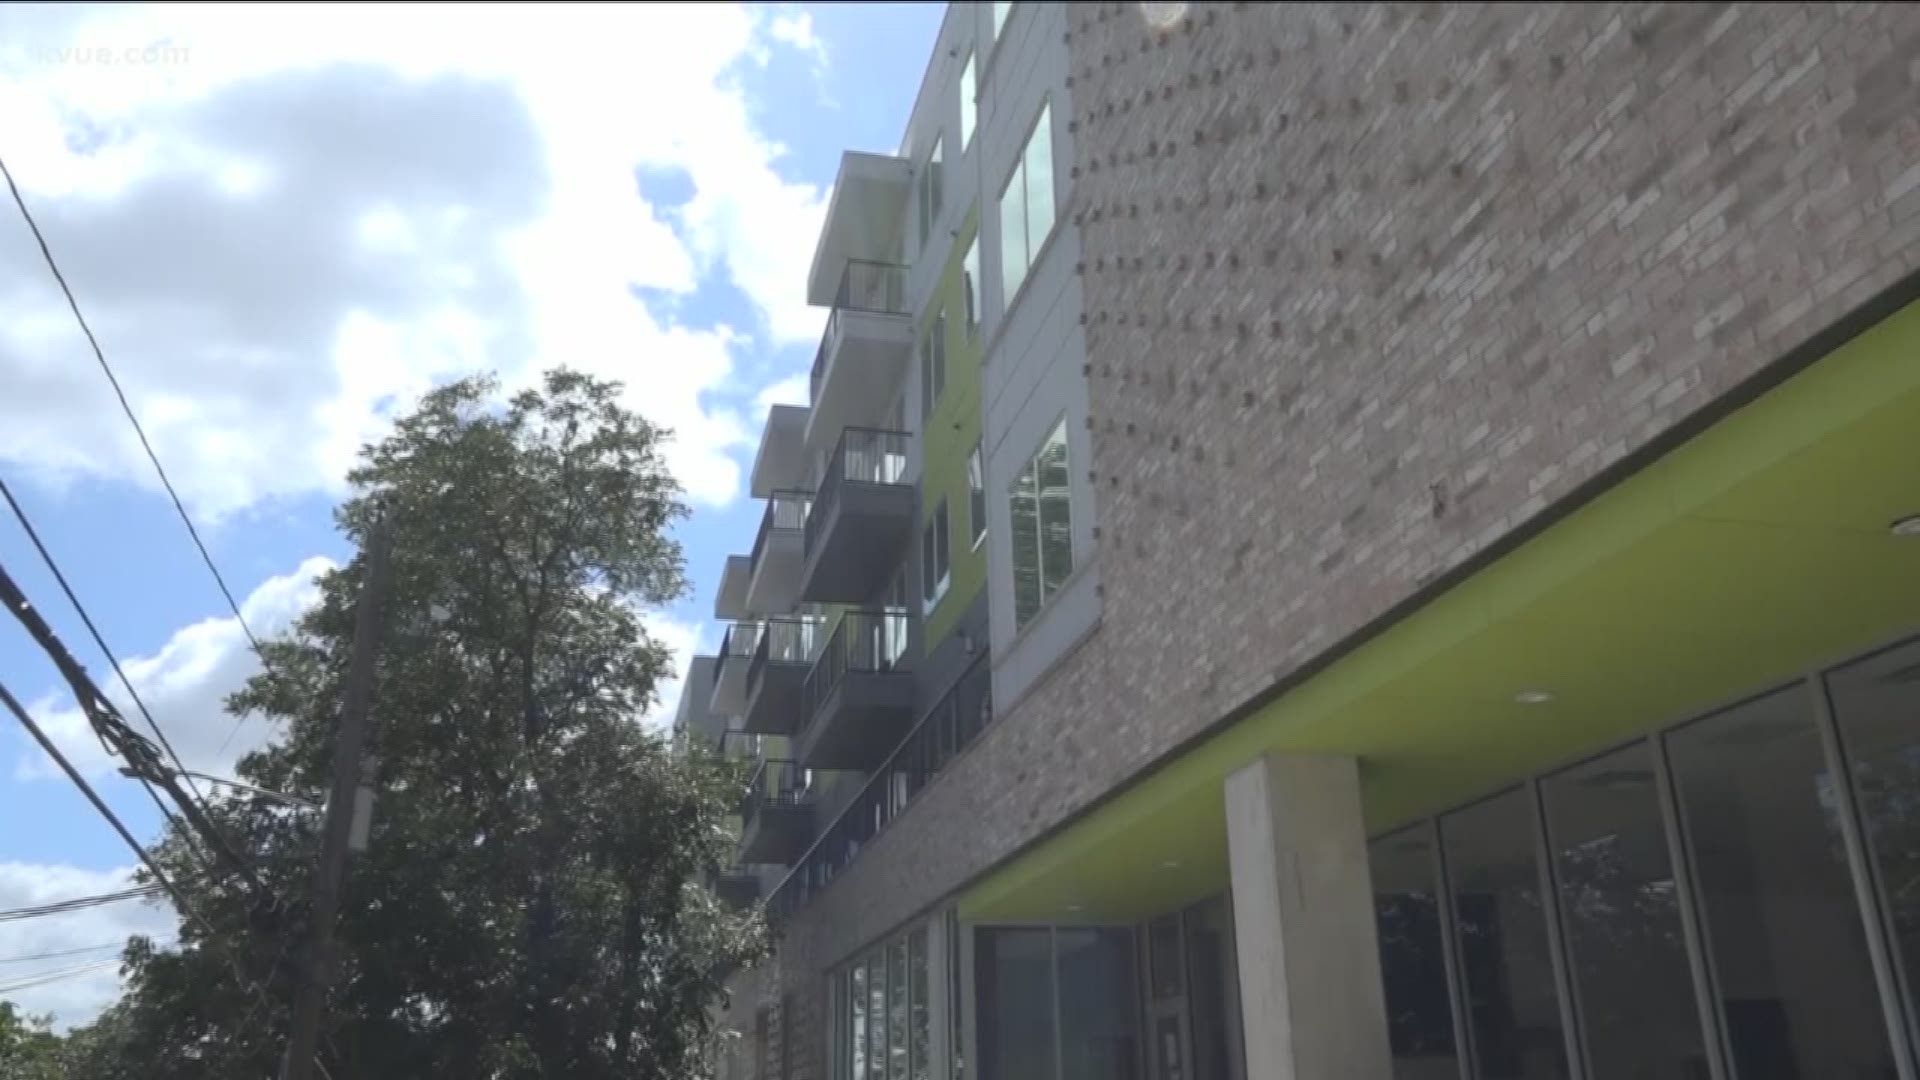 The complex is hoping to move 160 Texas State students back into their apartments soon.